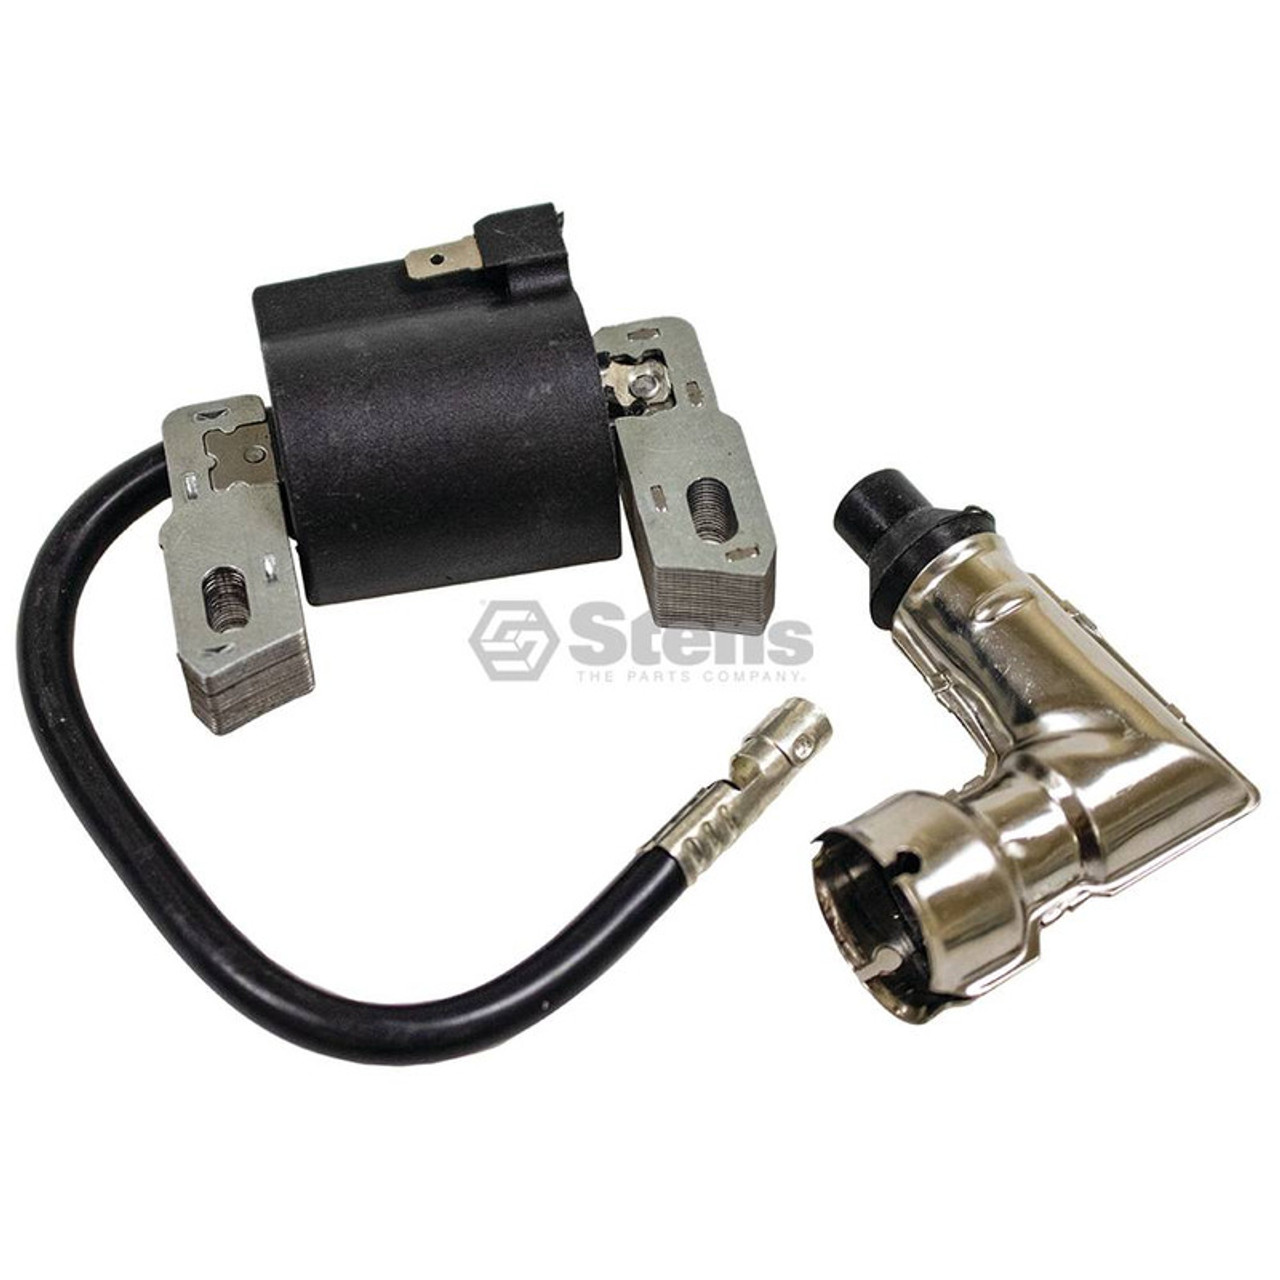 Ignition Coil for Briggs and Stratton 590455, 792631, 793354, 799382 &